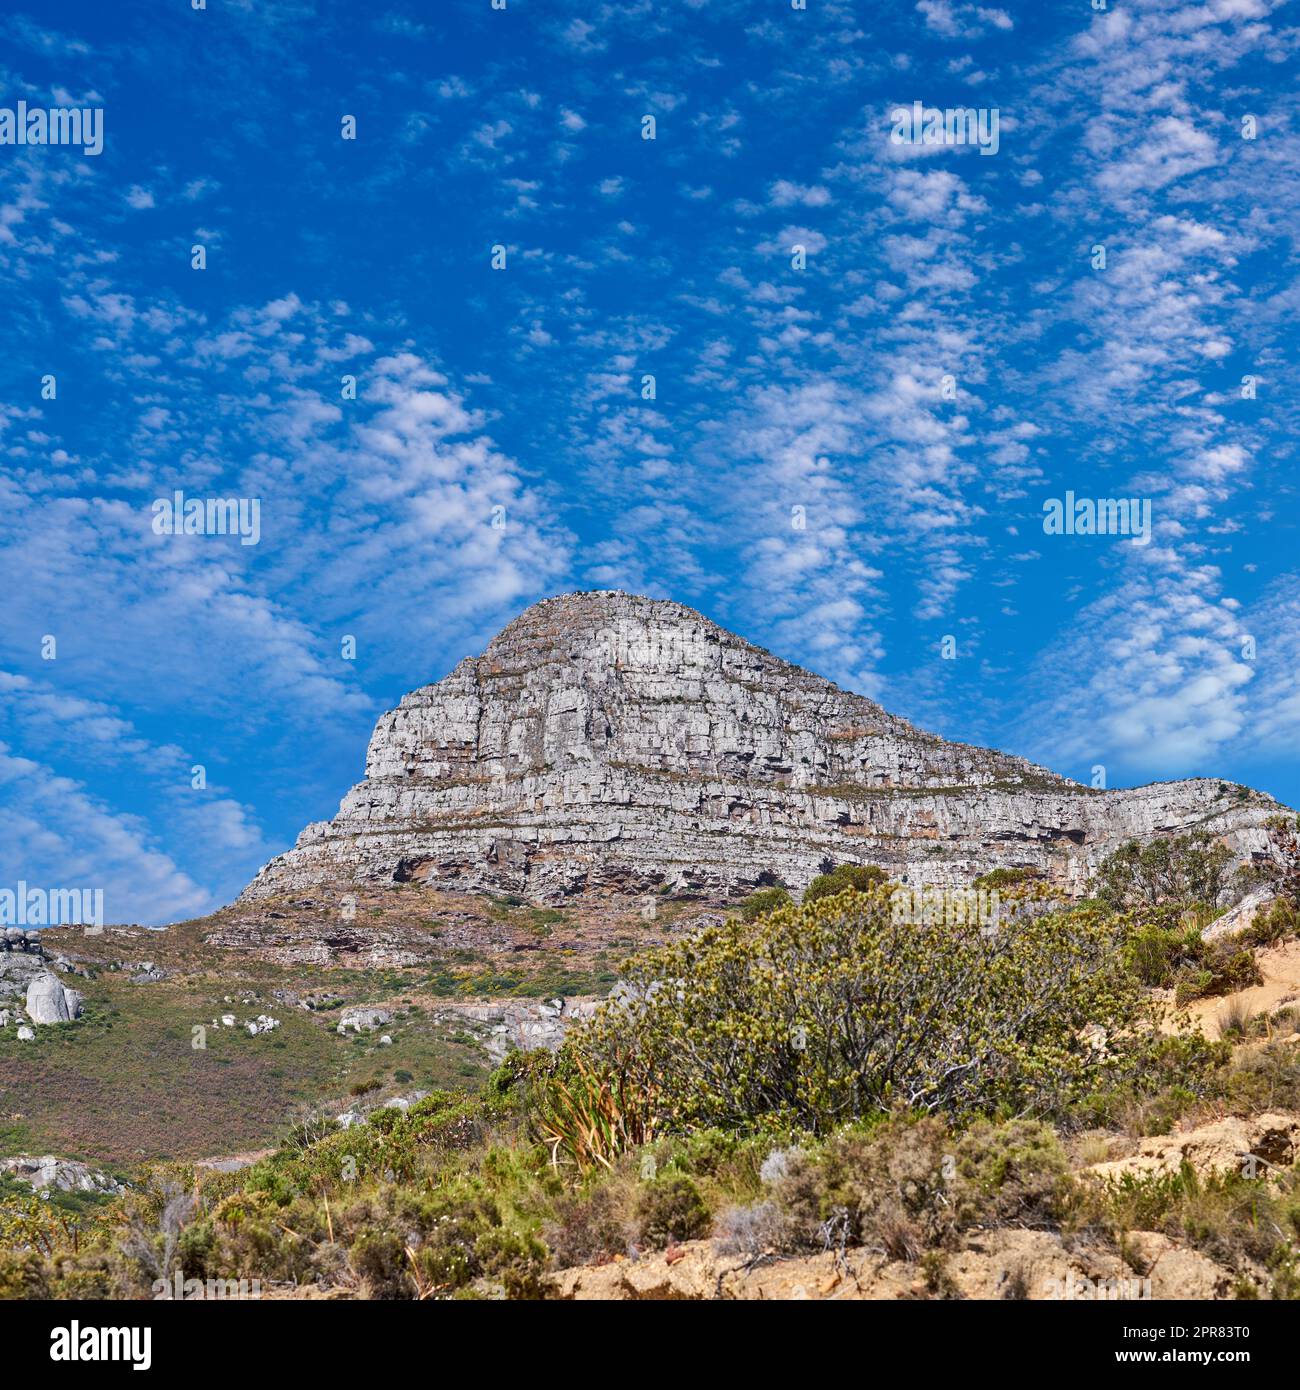 Copyspace with scenery of Lions Head at Table Mountain National Park in Cape Town, South Africa against a cloudy blue sky background. Panoramic of an iconic landmark and famous travel destination Stock Photo